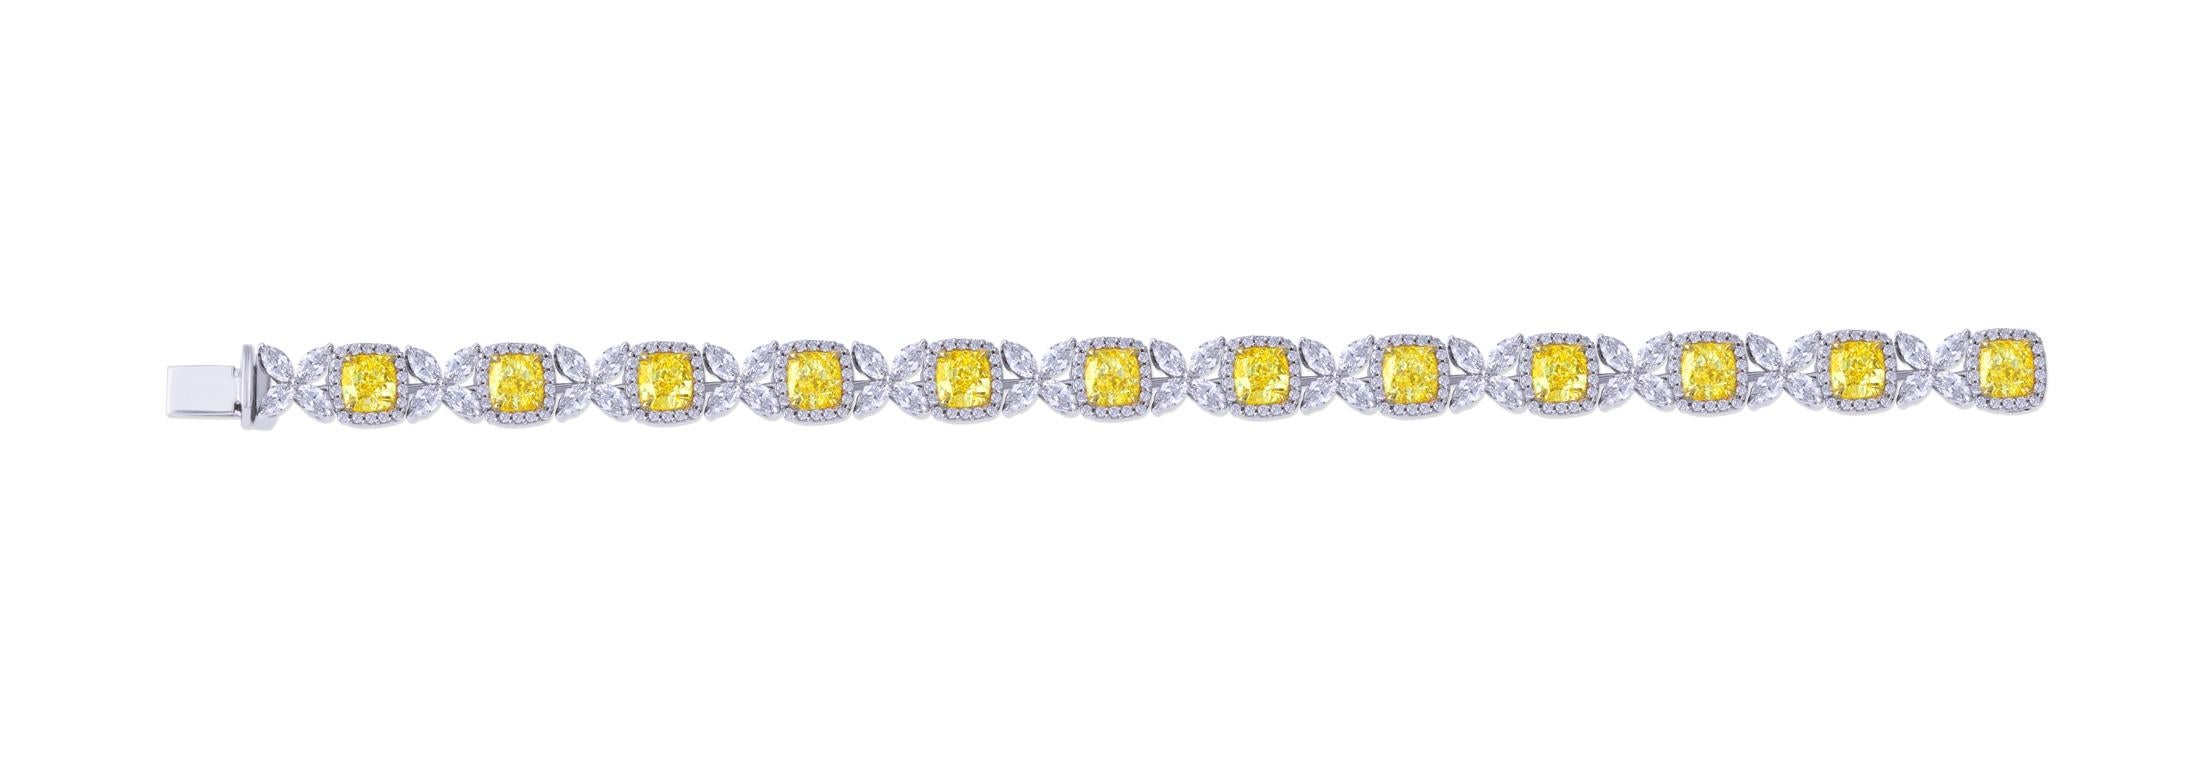 Made exclusively at the state of the art, P Hirani Jewelry Atelier, translating 40 years of experience into producing one of a kind fancy color diamond jewelry. 

Lustrous vintage inspired ,sun kissed Yellow radiant diamond & White marquise